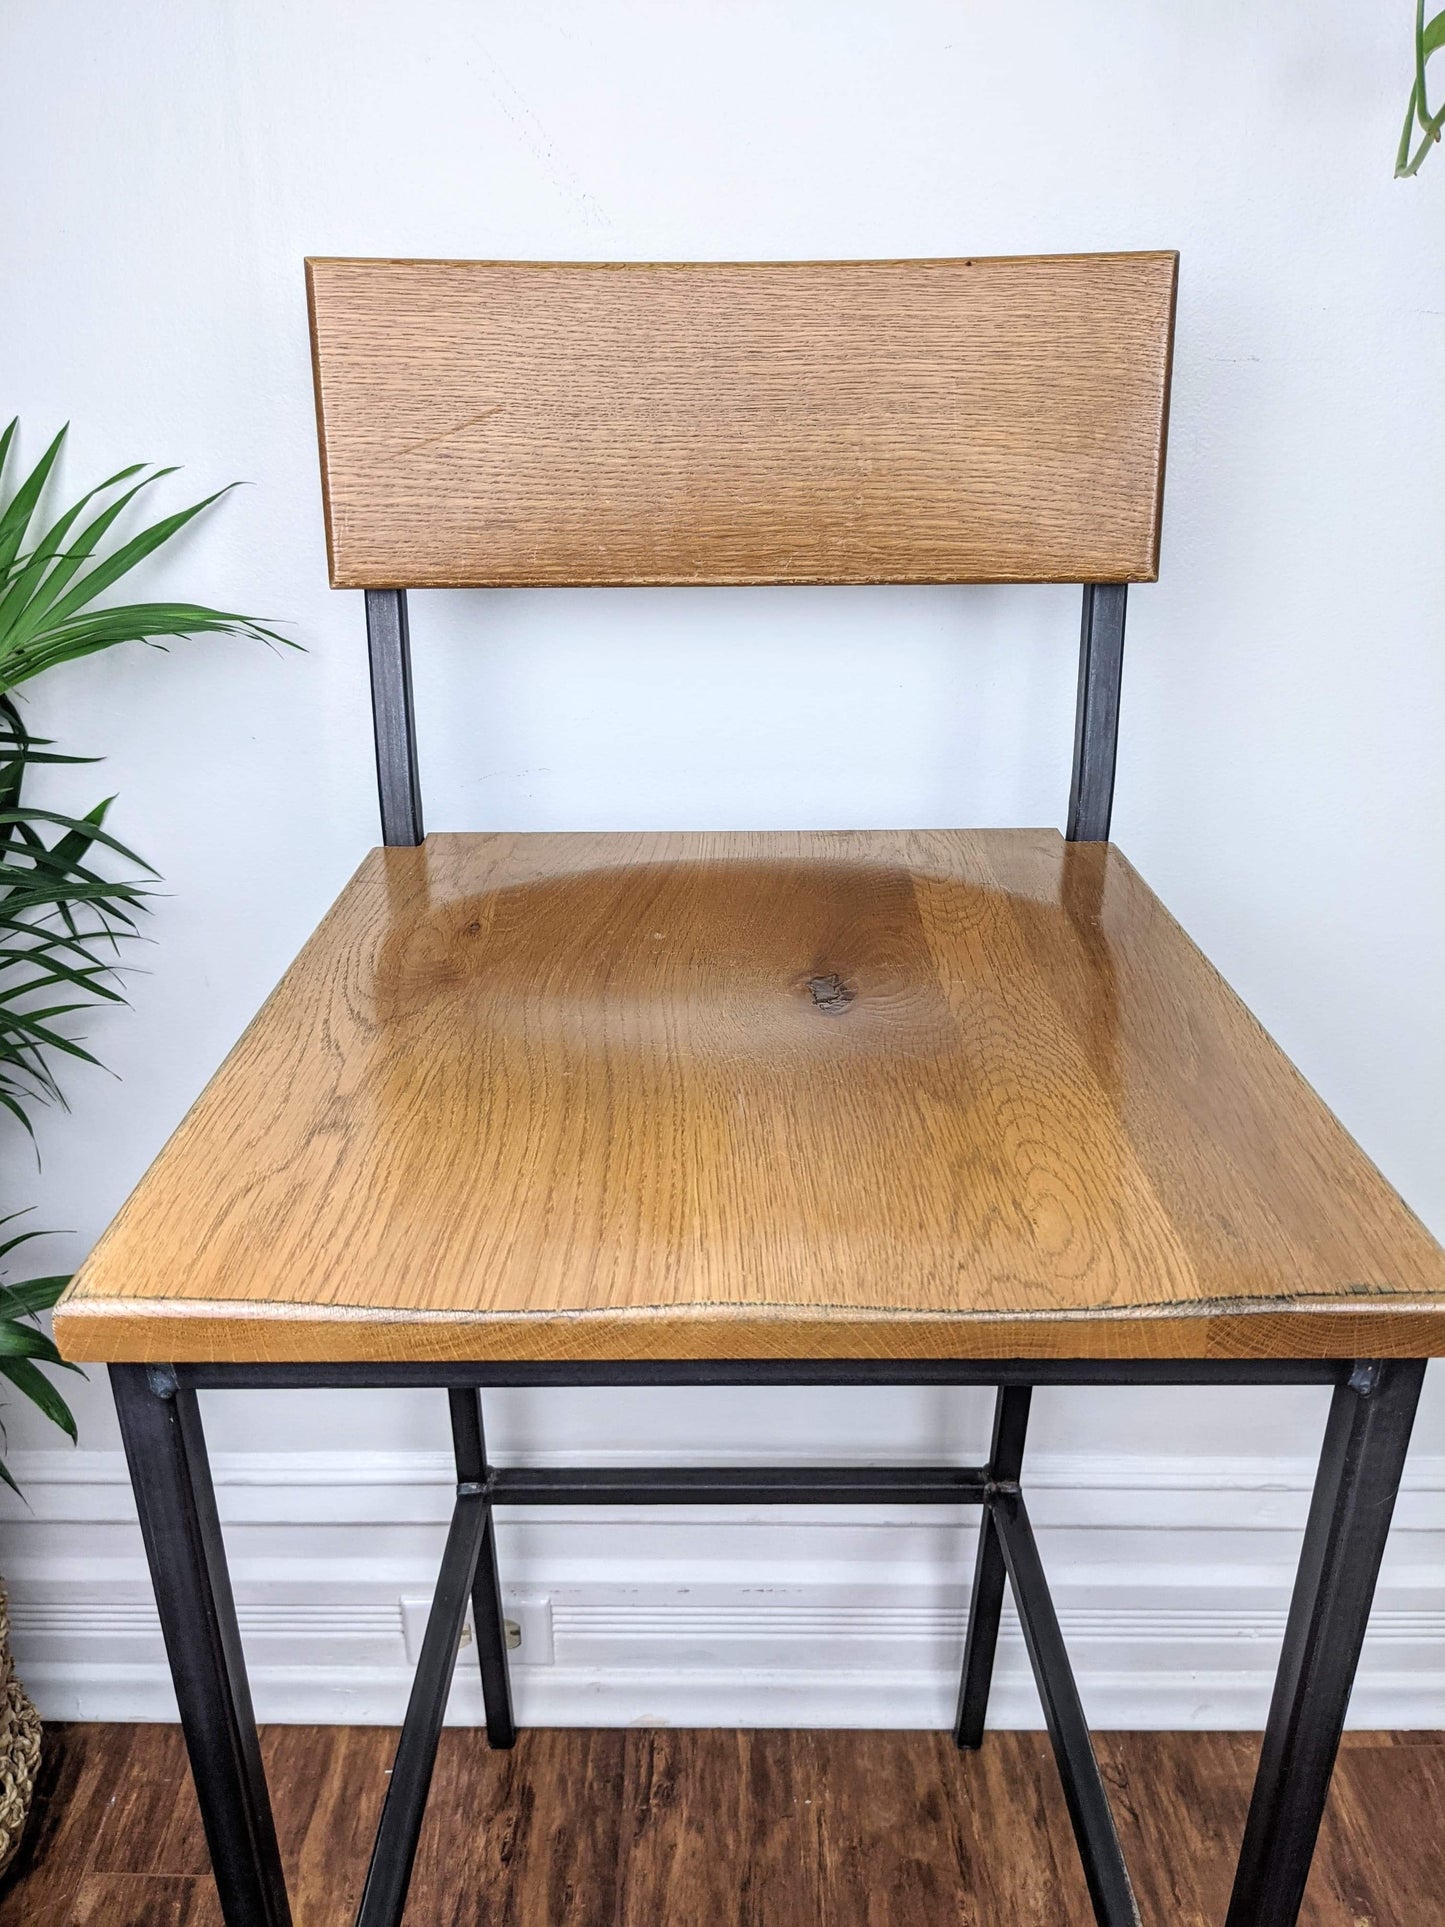 The Plymouth Stool